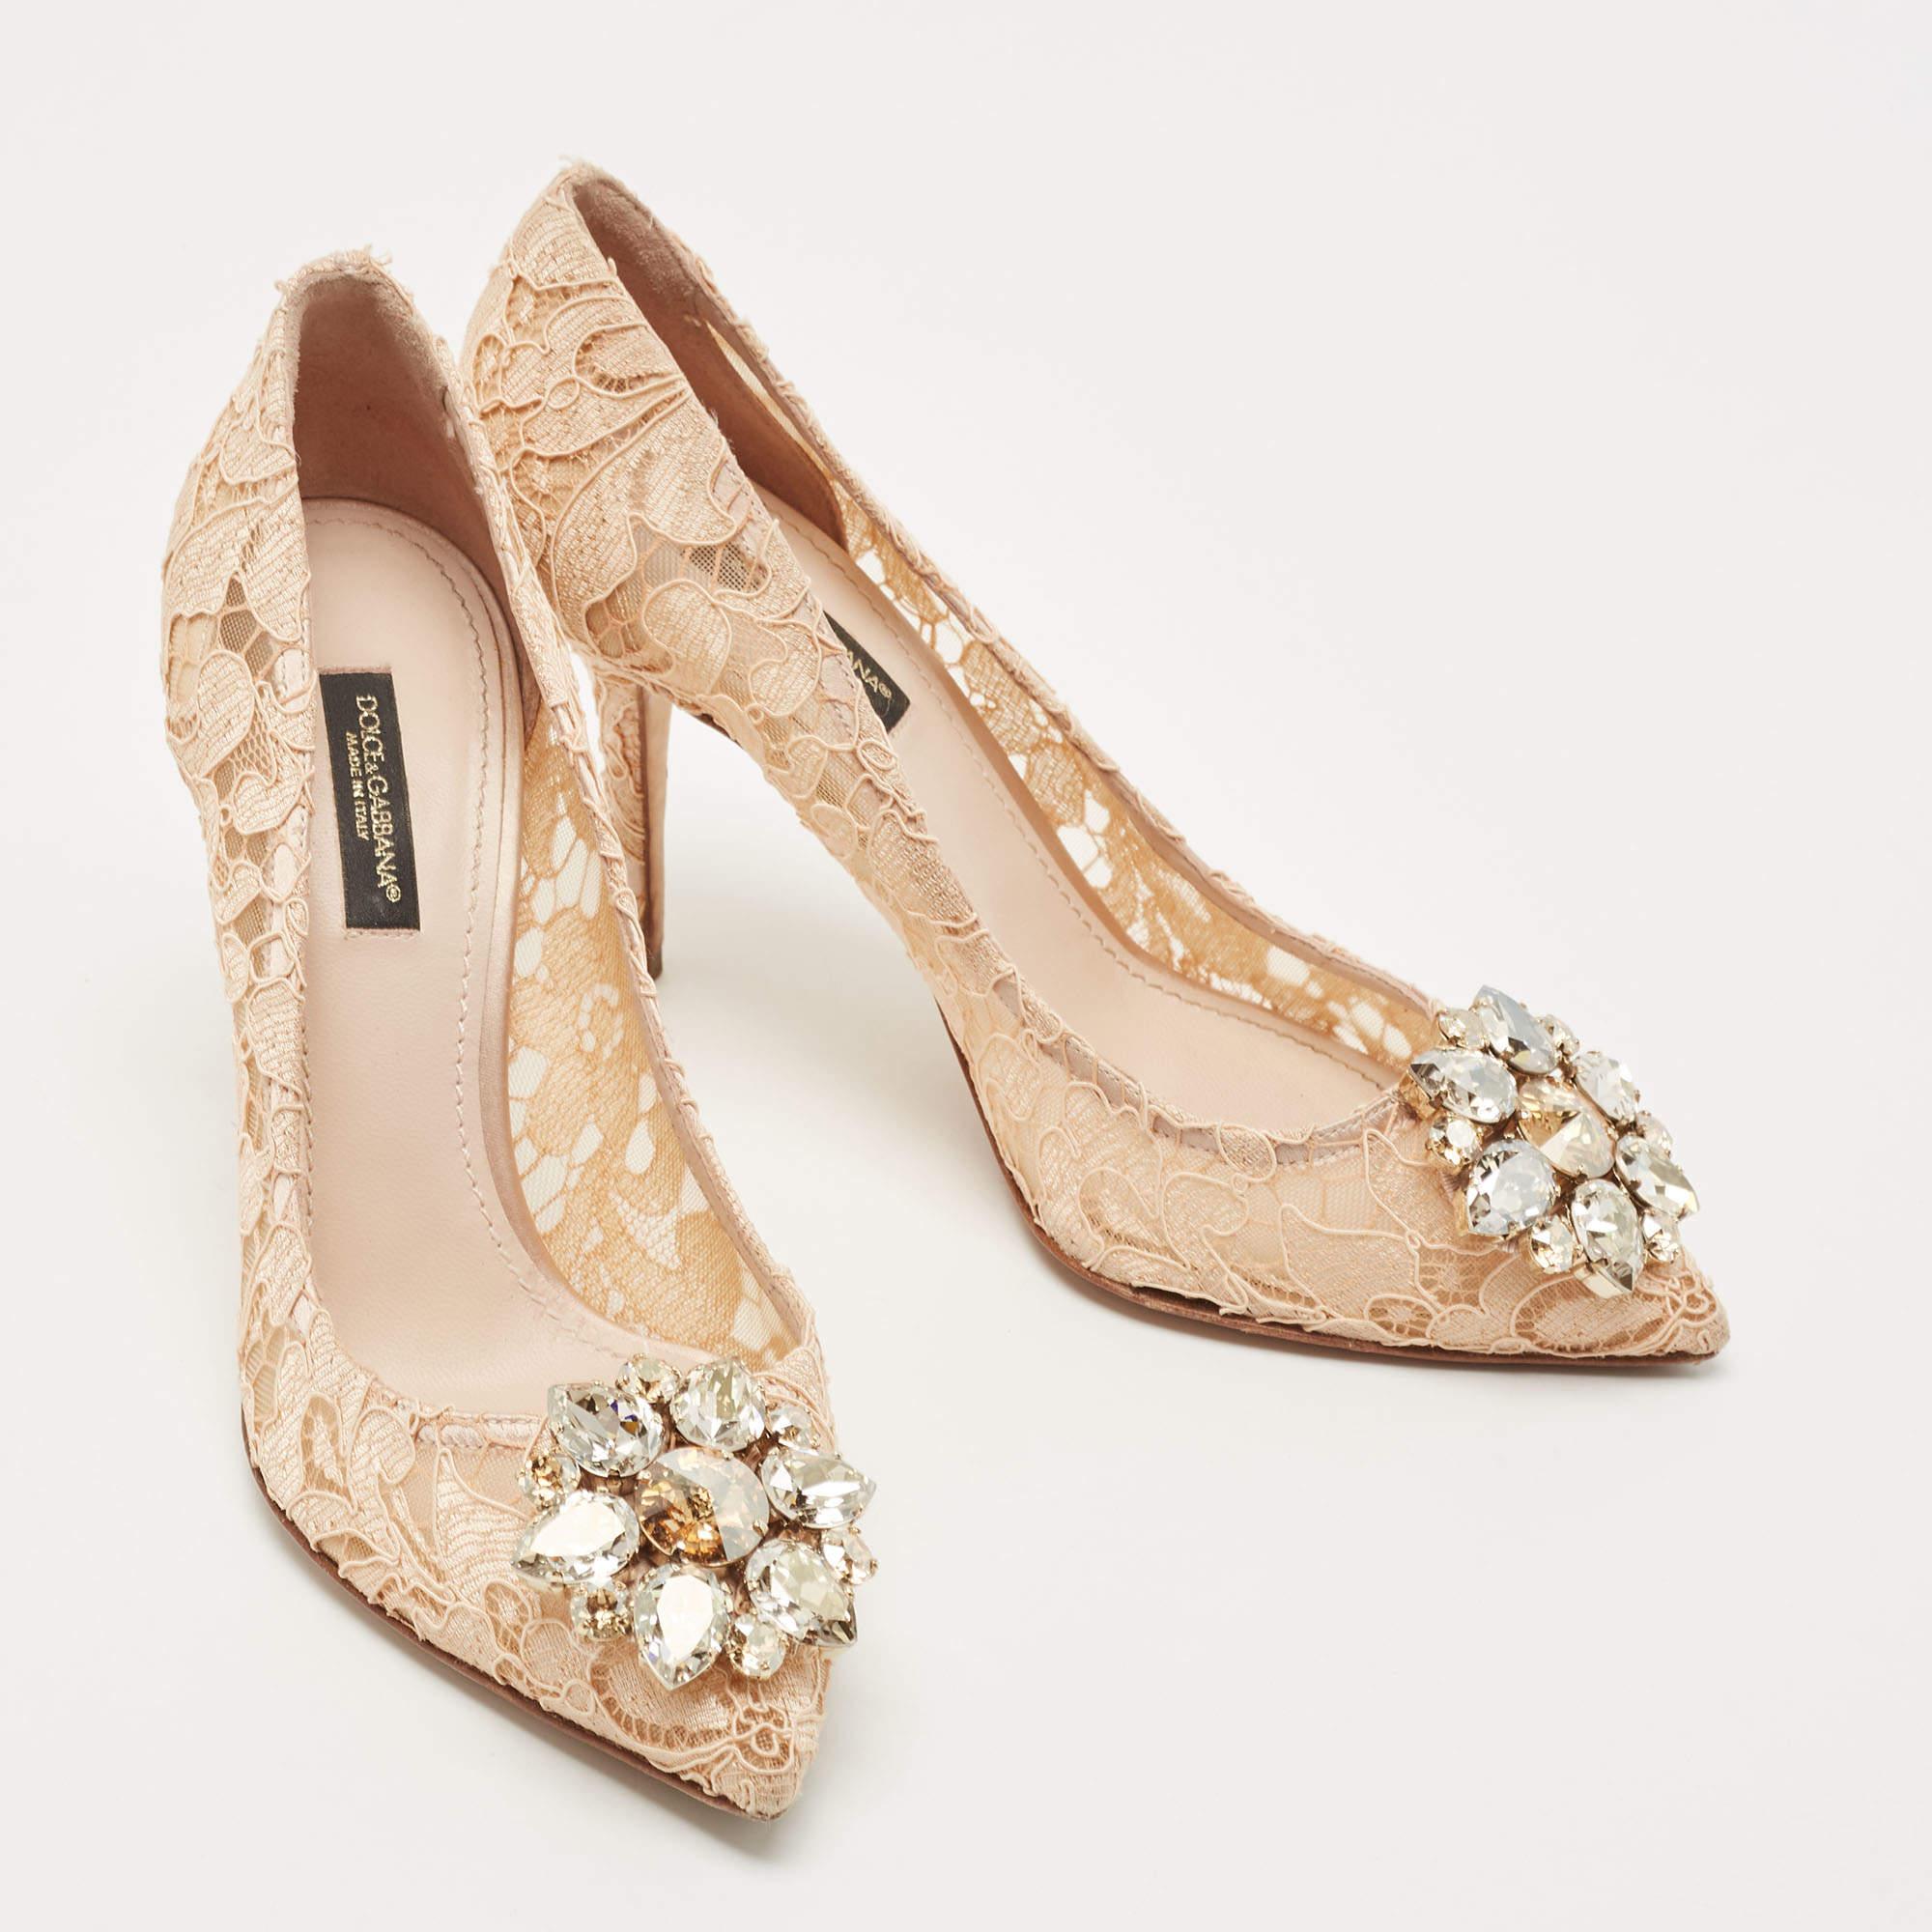 These Dolce & Gabbana lace pumps in beige are meant to last you season after season. They have a comfortable fit and high-quality finish.

Includes: Original Dustbag, Original Box, invoice